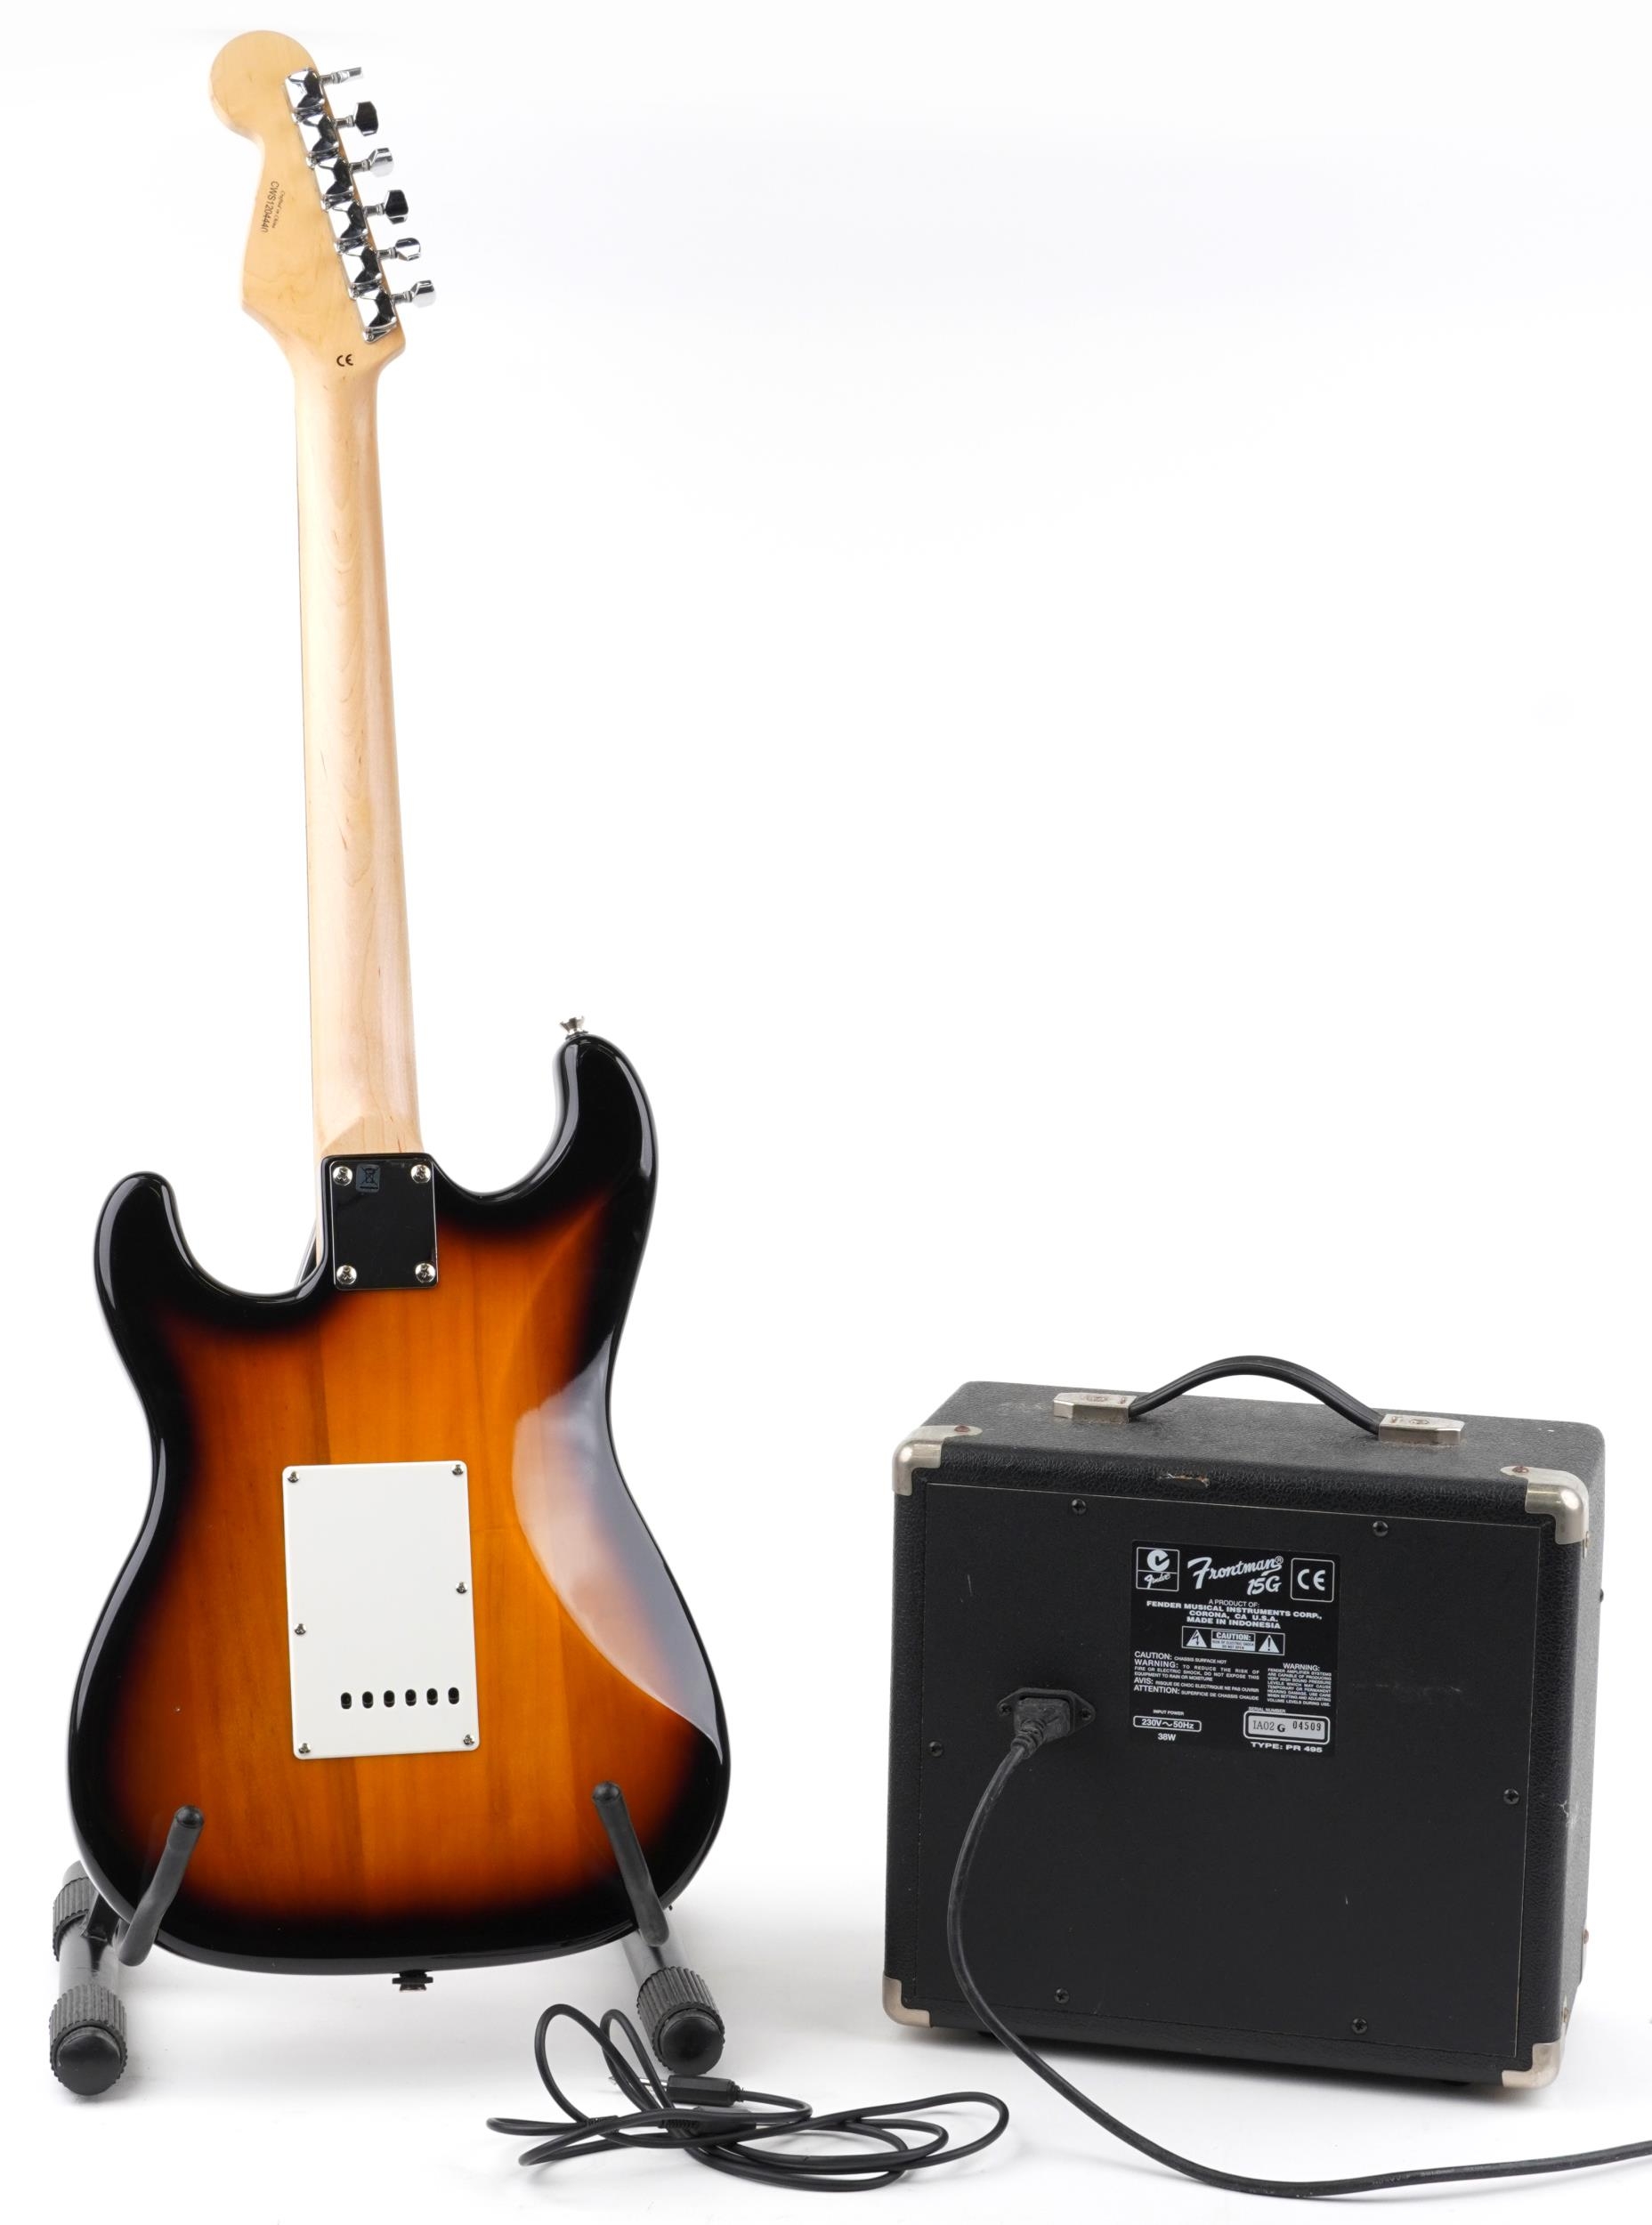 Starcaster by Fender six string electric guitar with Fender Front Man 15G amplifier and stand, the - Image 2 of 4